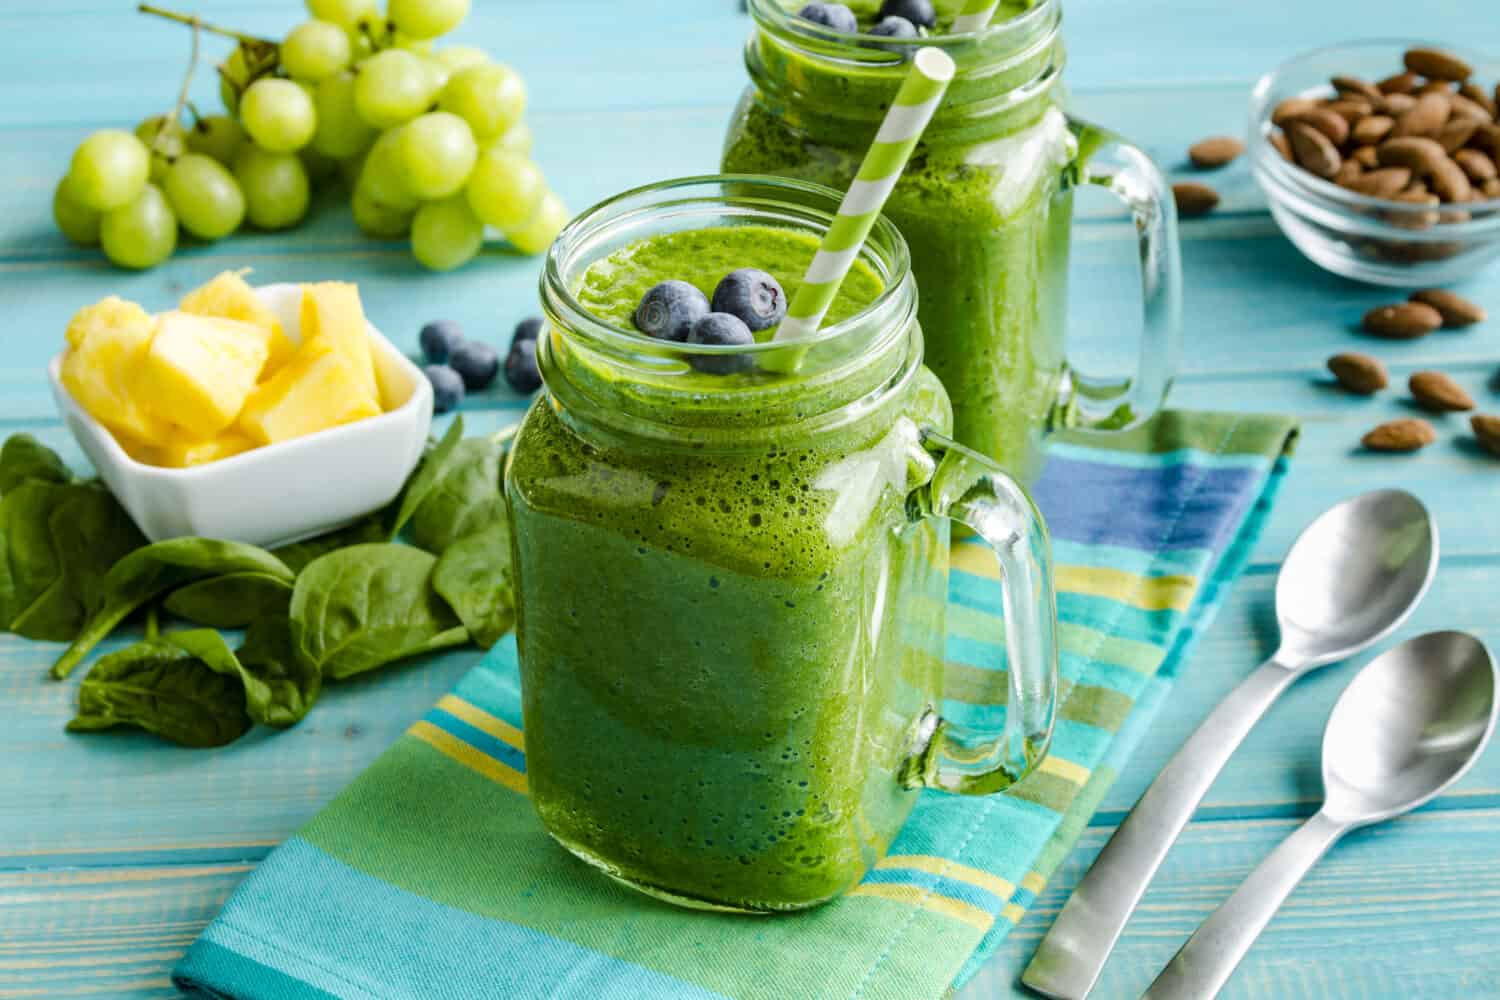 Mason jar mugs filled with green spinach and kale health smoothie with green swirled straw sitting with blue striped napkin and spoons